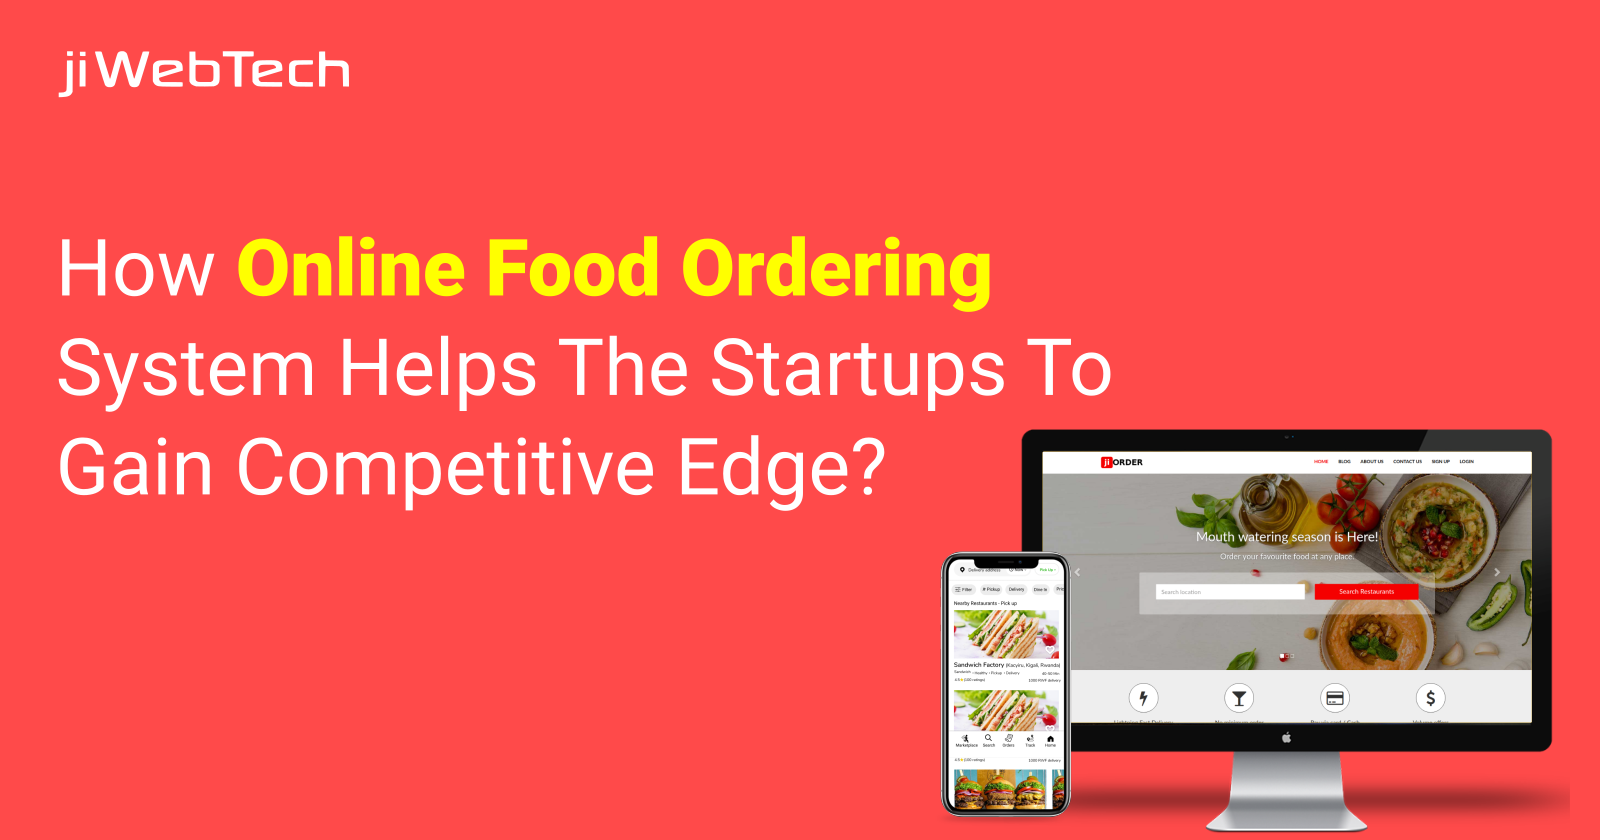 How Online Food Ordering System Helps the Startups to Gain Competitive Edge?